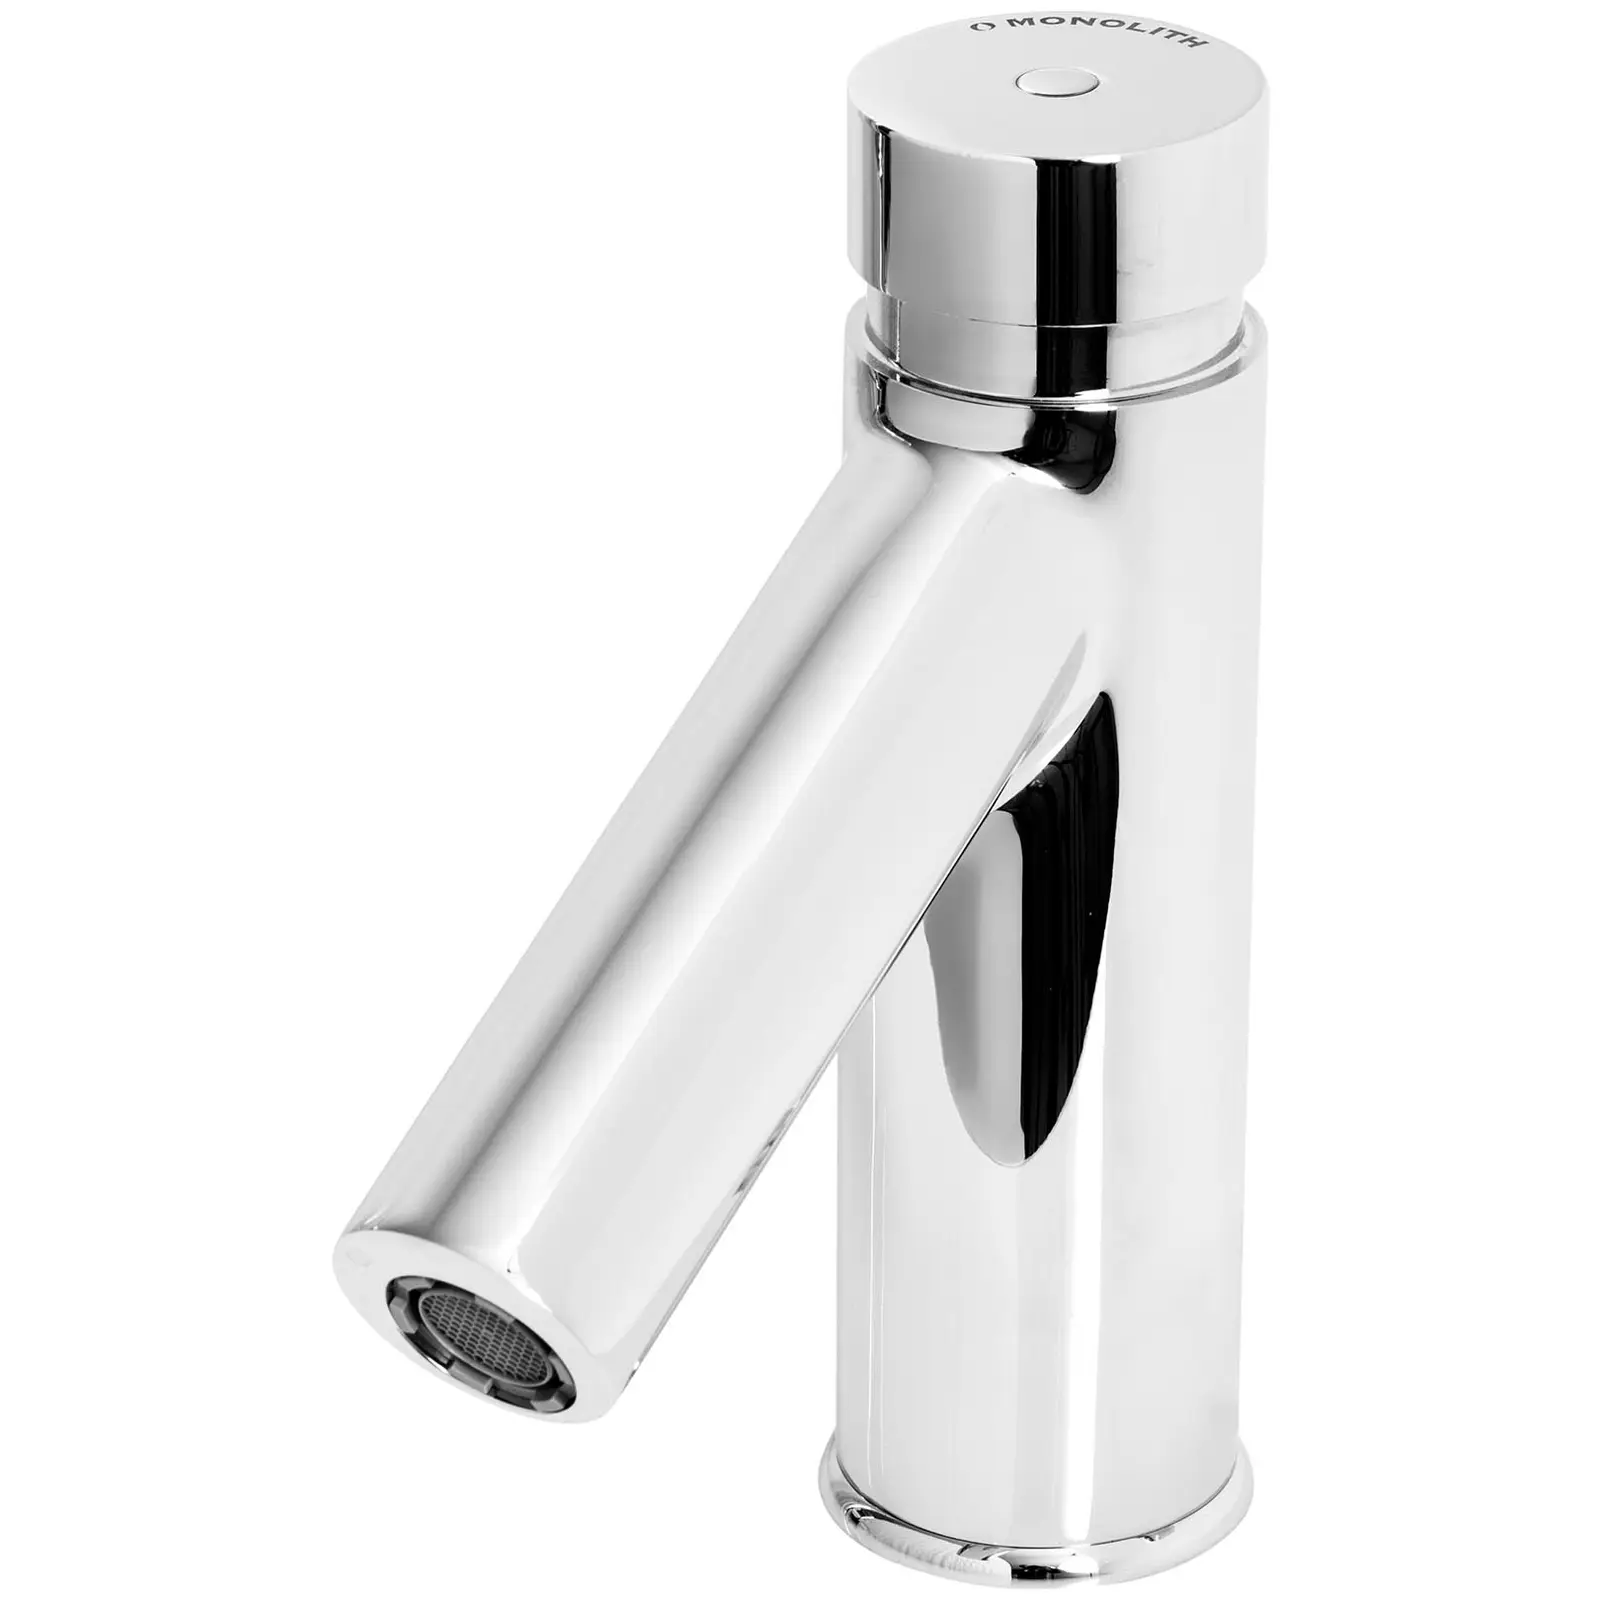 Self-Closing Tap - chrome-plated brass